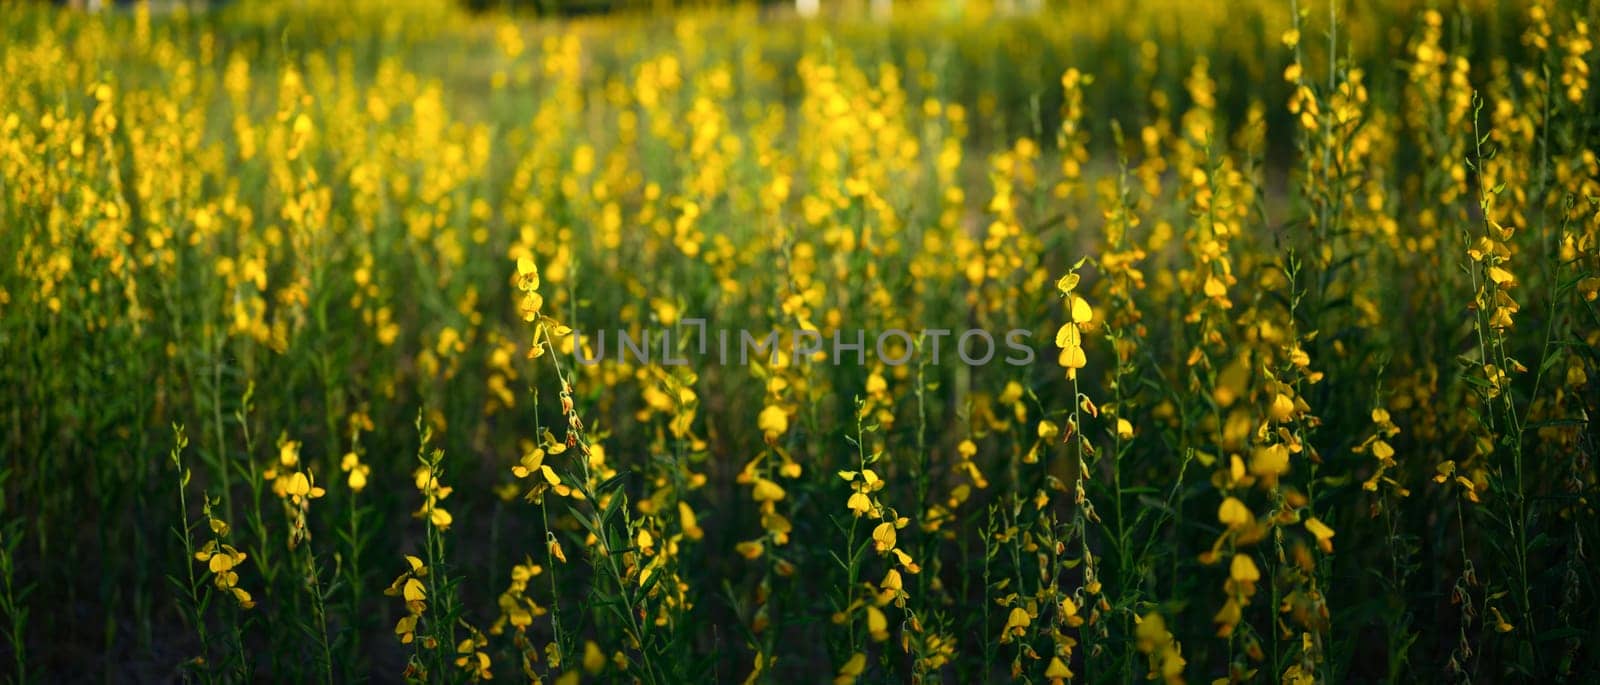 Yellow flowers of Crotalaria juncea or sunn hemp blooming in fields for soil improvement at sunset. by prathanchorruangsak